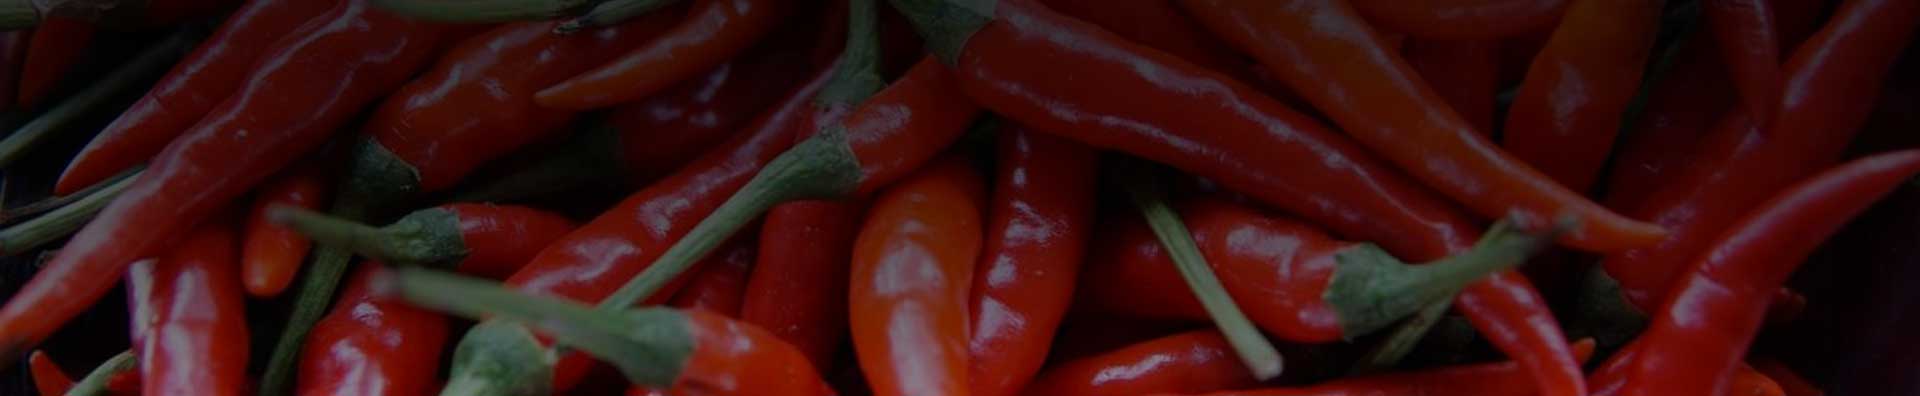 Selection Chili Pepper background